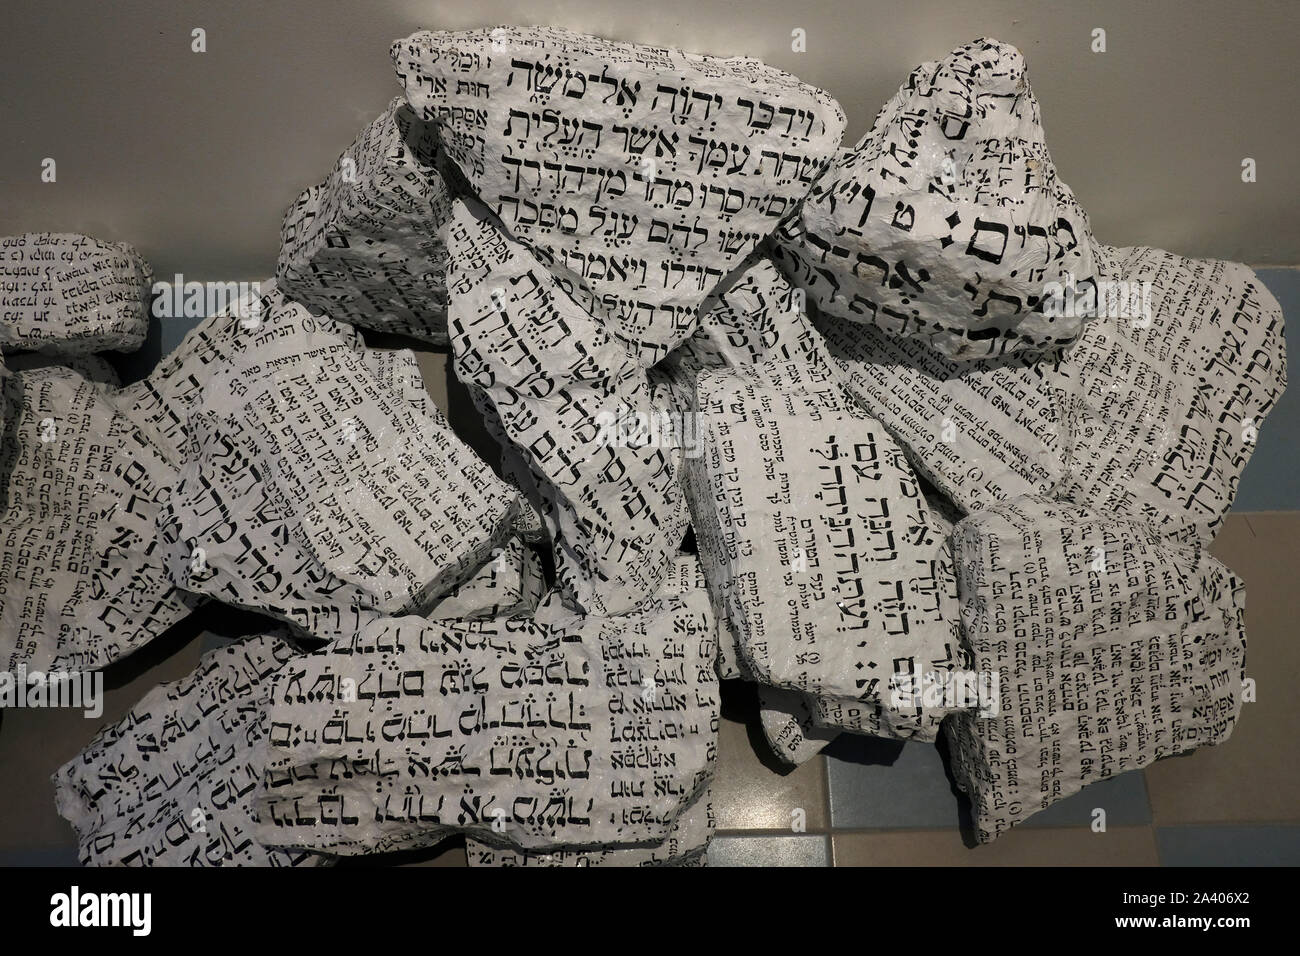 Artwork installation by artist Avner Sher of stones marked with biblical text in Hebrew which symbolize political violence part of an exhibition entitled Human Nature Shared Sensitivities, created for the 2019 Jerusalem Biennale for Contemporary Jewish Art, displayed in Heichal Shlomo the former seat of the Chief Rabbinate of Israel and currently a museum located adjacent to the Great Synagogue of Jerusalem, Israel Stock Photo